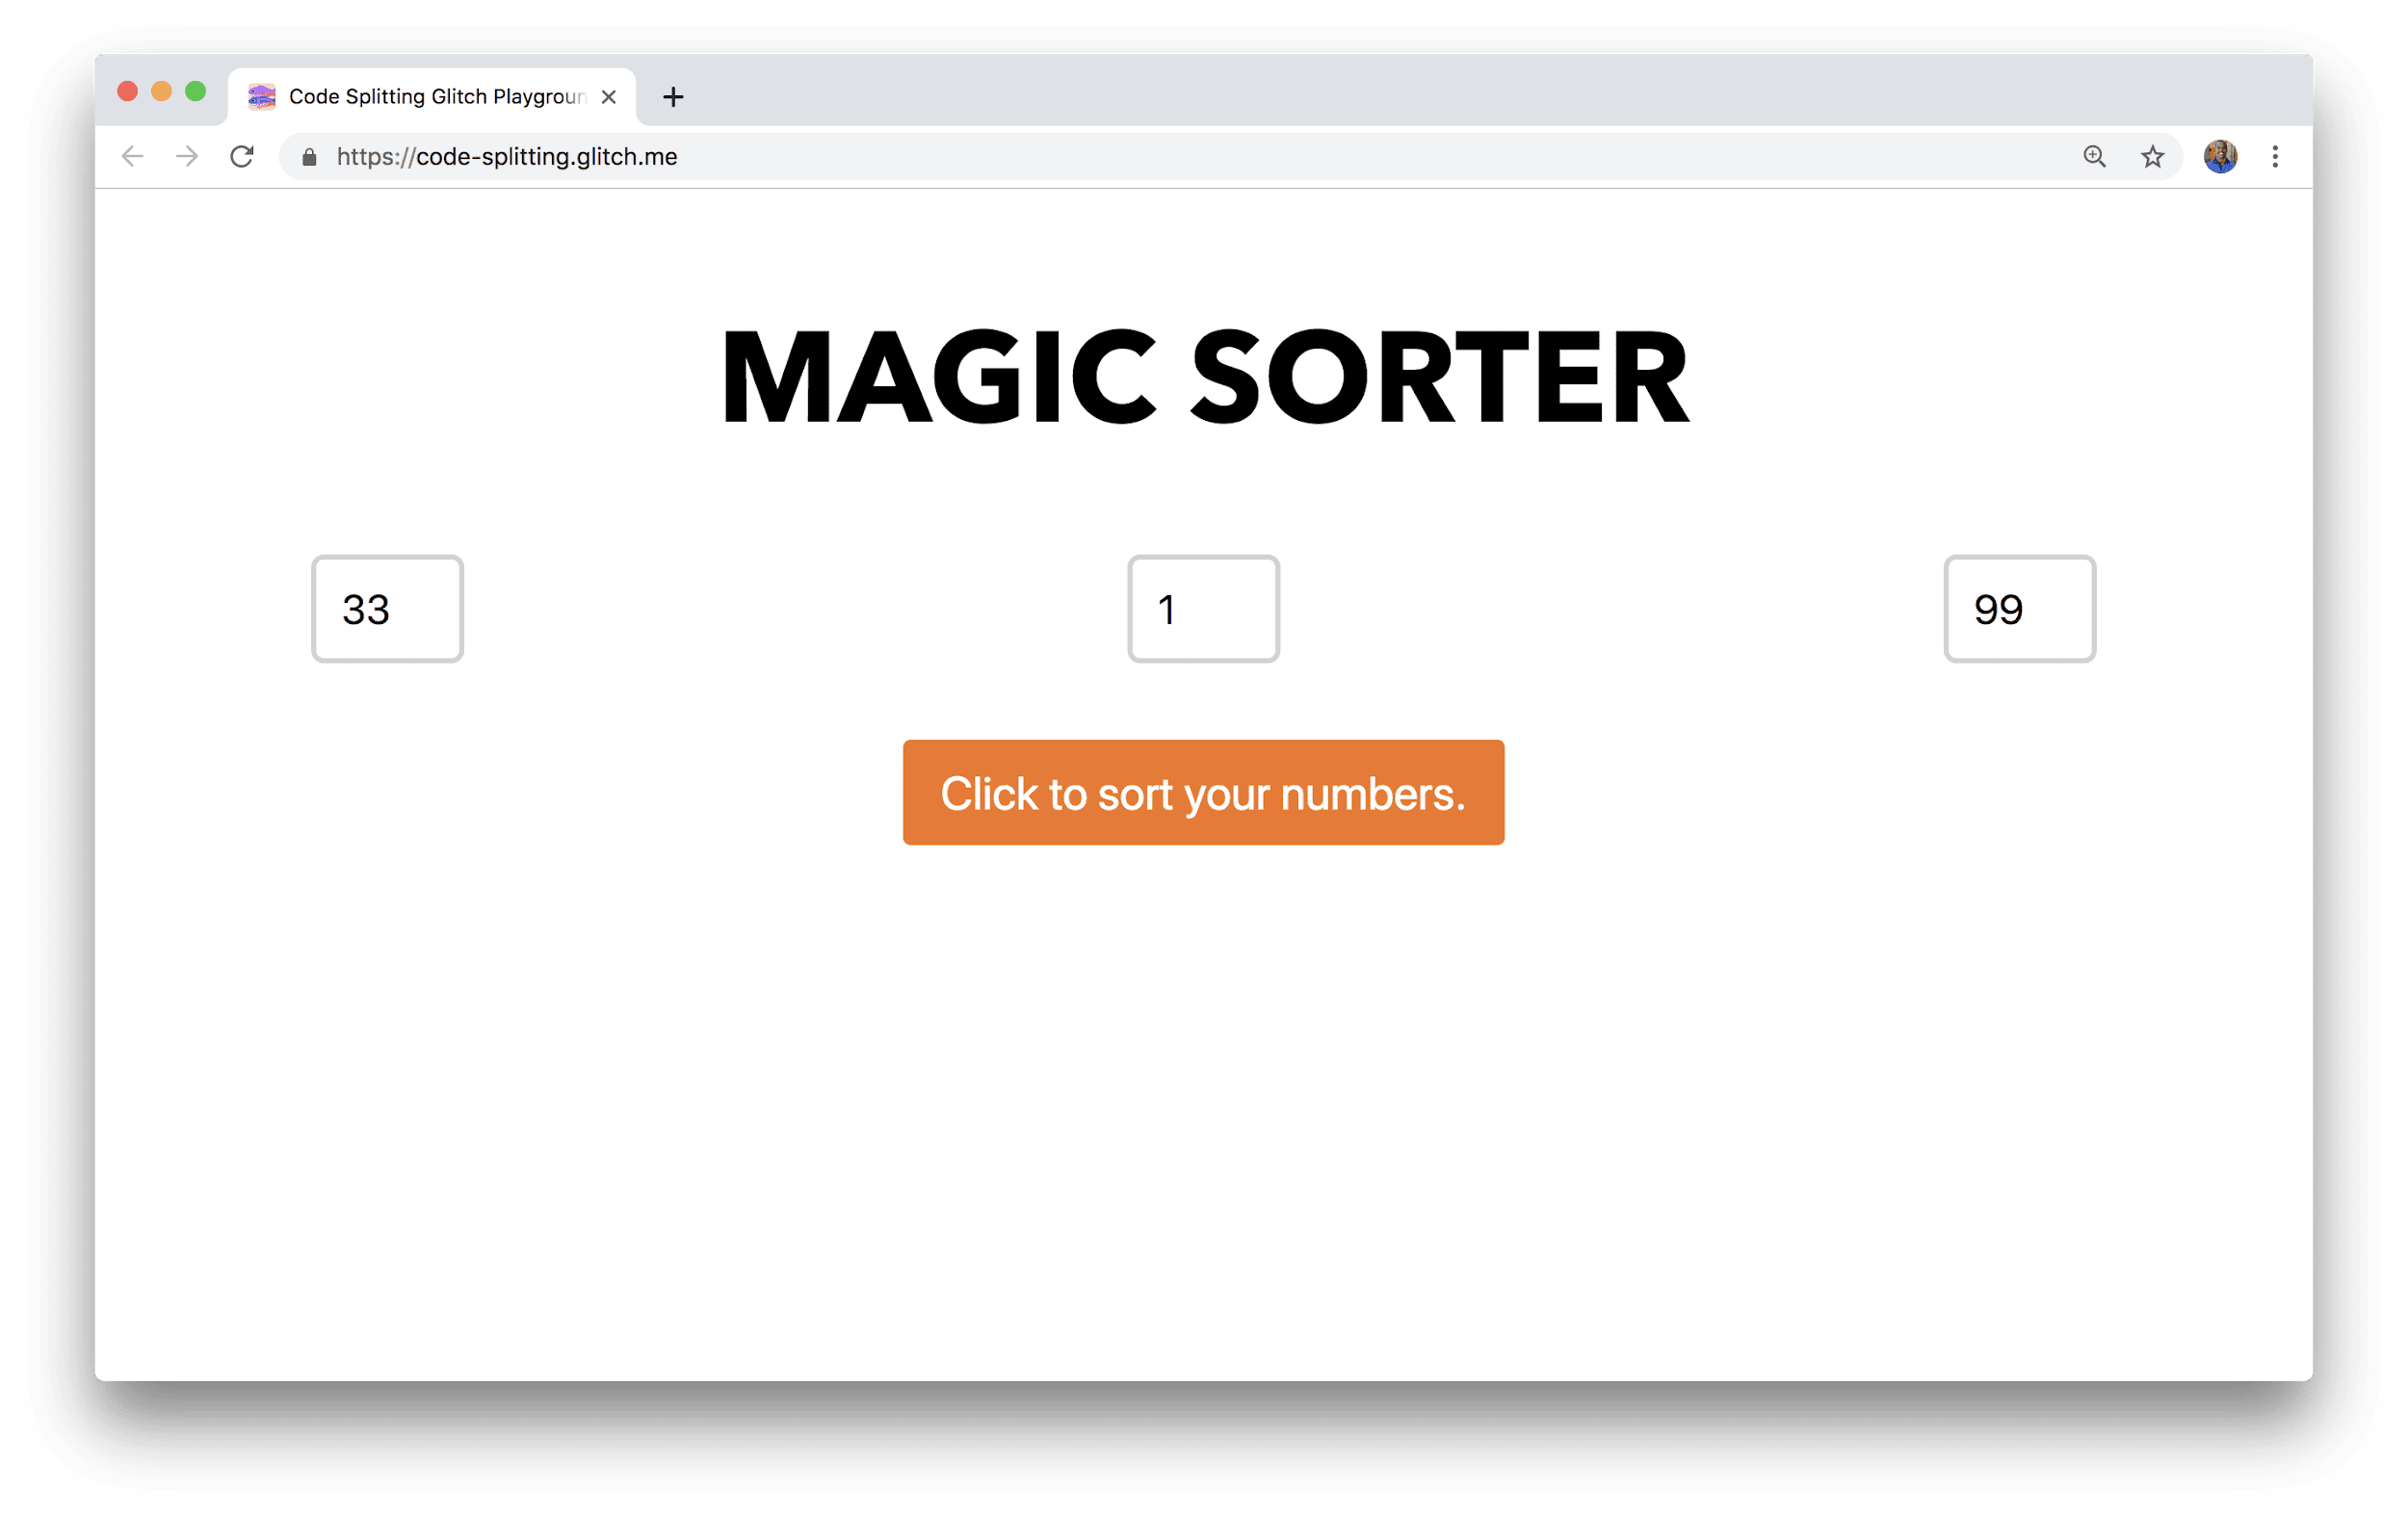 A browser window shows an application titled Magic Sorter with three fields for inputting numbers and a sort button.